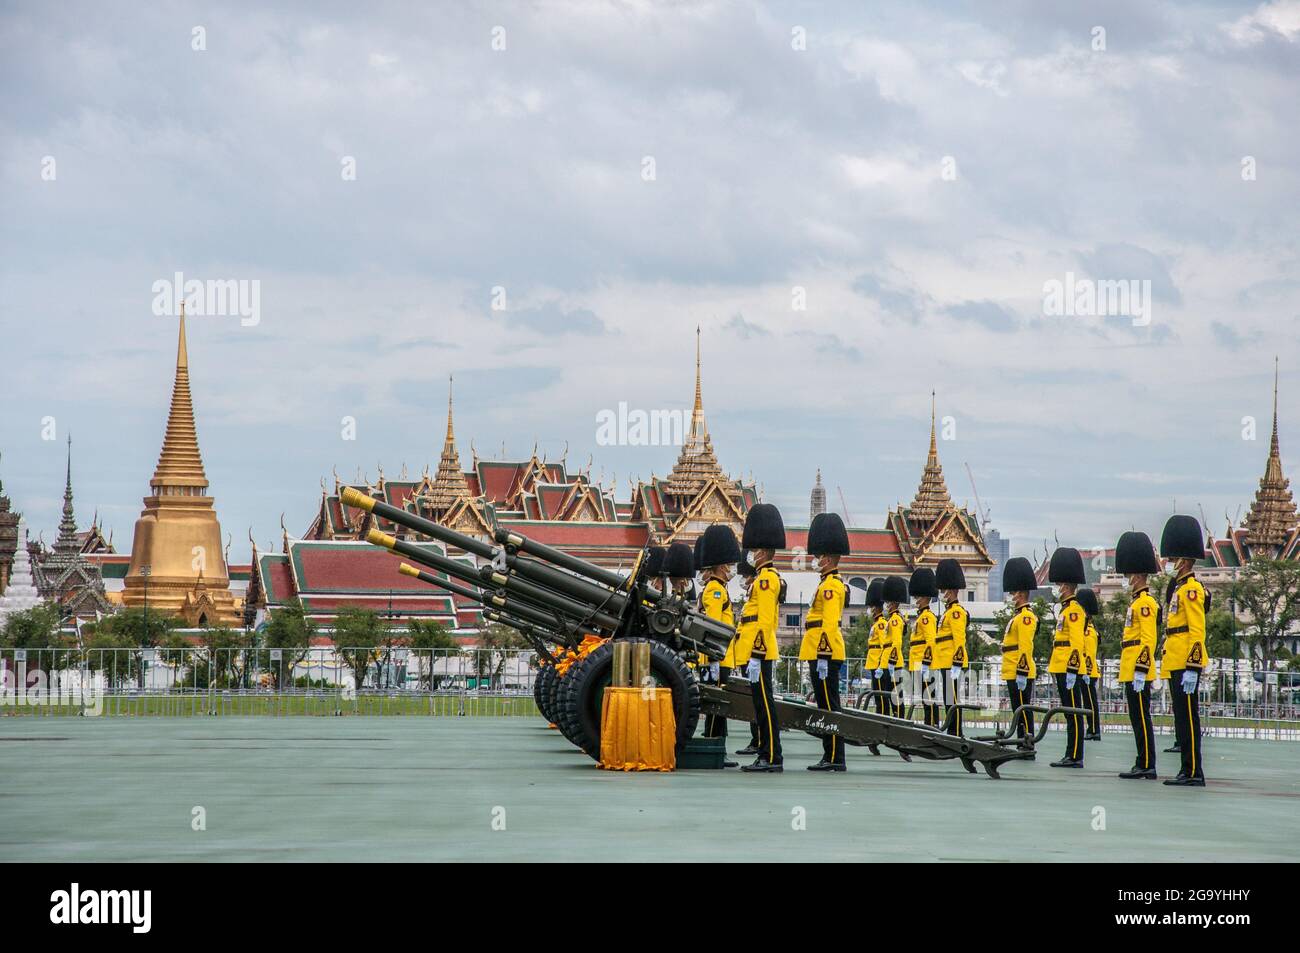 Bangkok, Thailand. 28th July, 2021. Thai Royal Guards prepare for a 21-gun salute to mark the 69th birthday of King Maha Vajiralongkorn also known as King Rama X. A company of the 1st Artillery Battalion, 1st Field Artillery Regiment, King's Guard, performed a 21-gun salute to mark the 69th birthday of Her Majesty King Maha Vajiralongkorn (King Rama X) on 28 July 2021.The military ceremony in honour of the King was held at the royal parade ground of Sanam Luang, adjacent to the Grand Palace. Credit: SOPA Images Limited/Alamy Live News Stock Photo